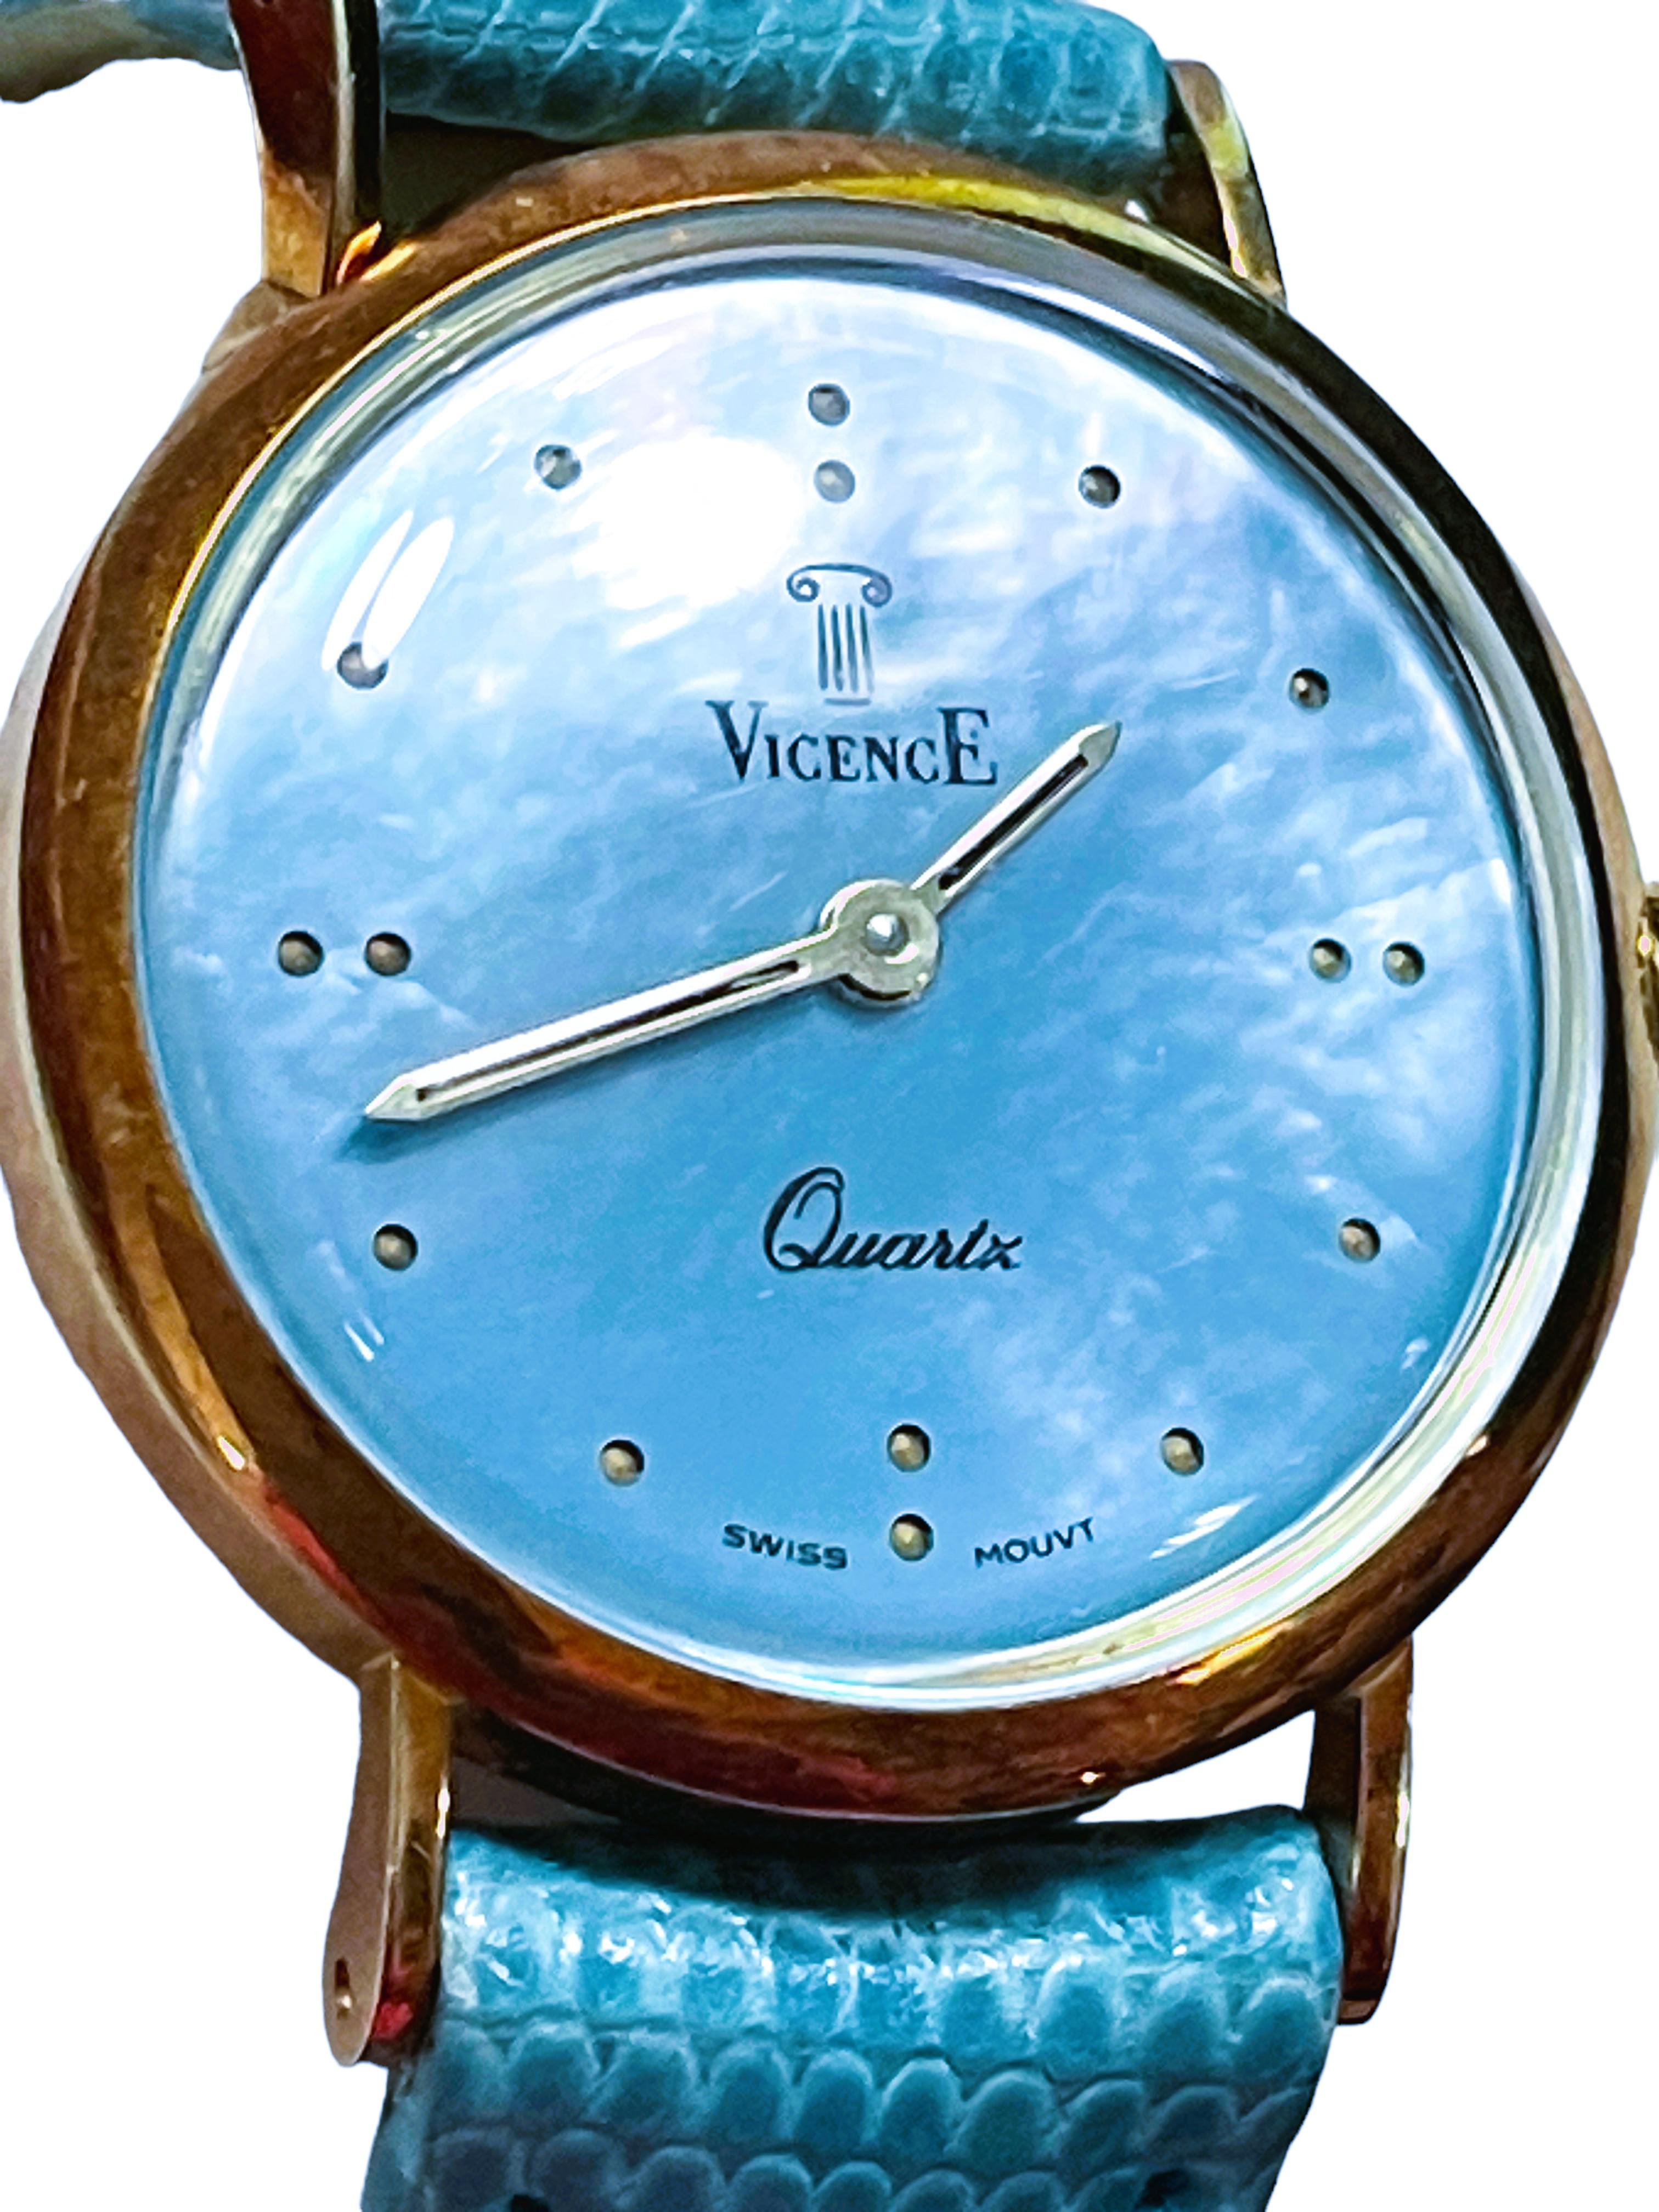 14k Yellow Gold Vicense Blue Pearlized Ladies Quartz Watch with Leather Band For Sale 2